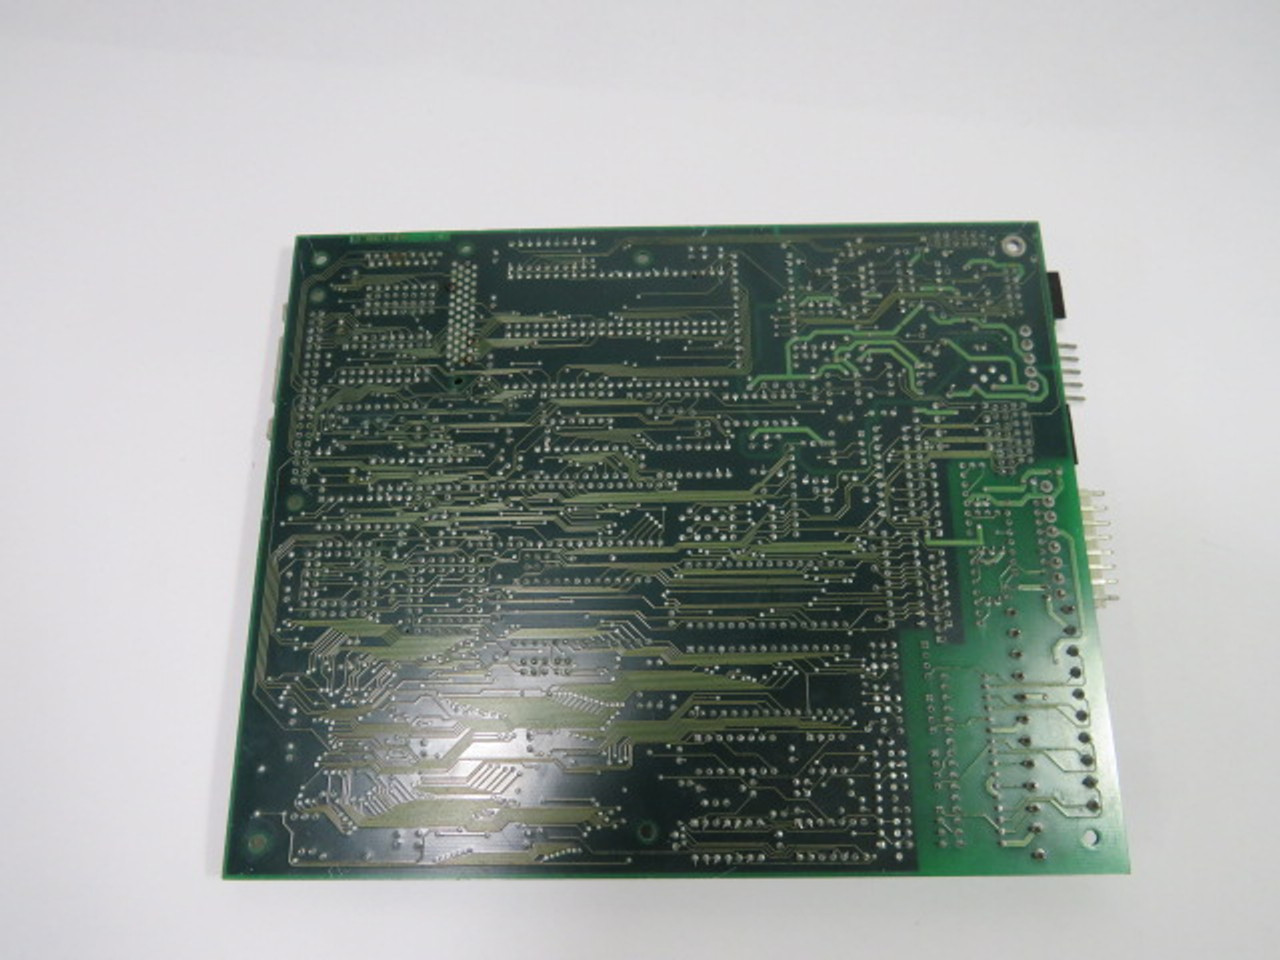 Loma 416170 1Q Main Control Processor Board *Missing Memory Chips* ! AS IS !